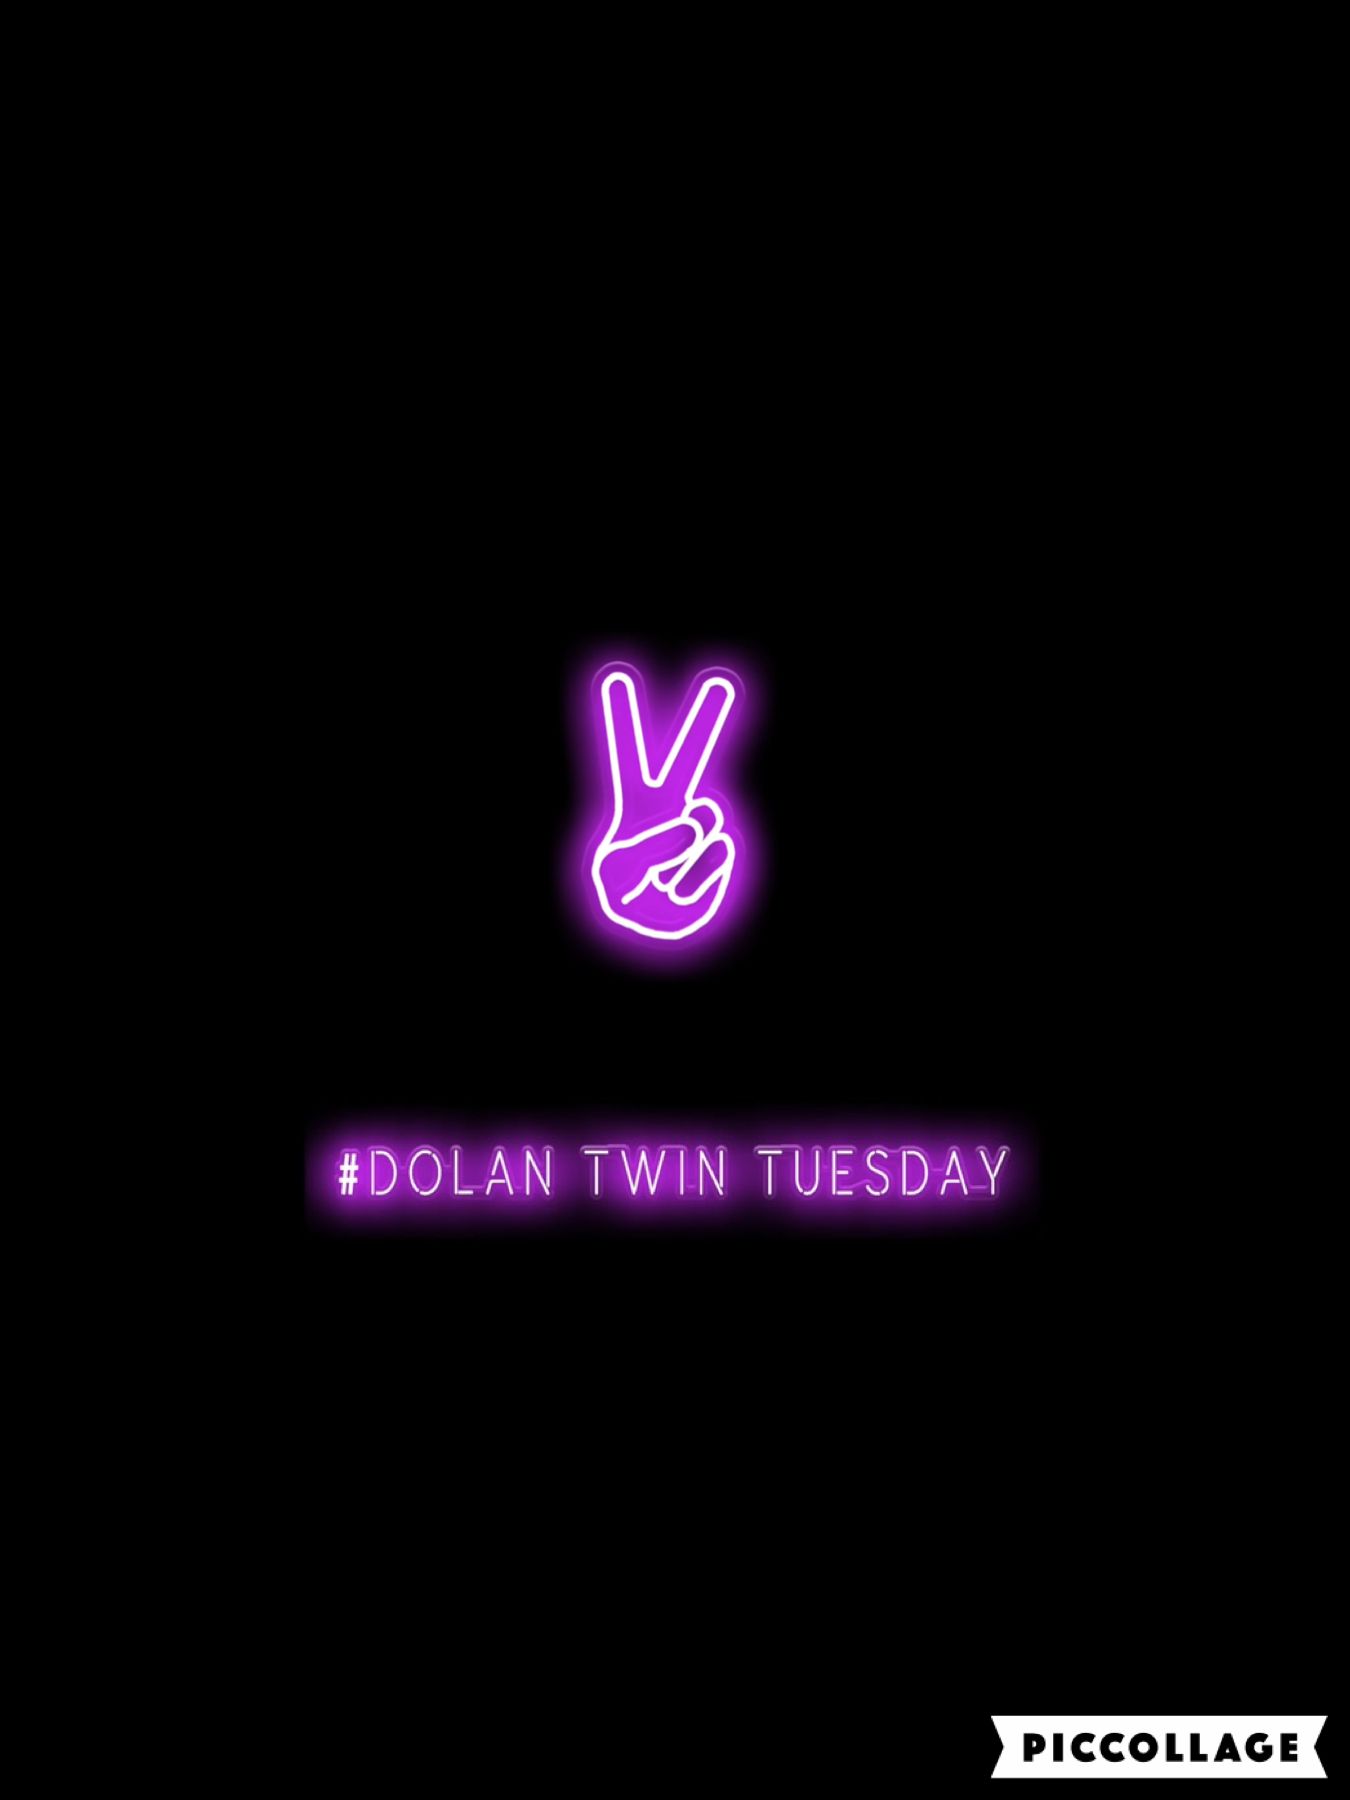 Created A Cool New Dolan Twins Wallpaper